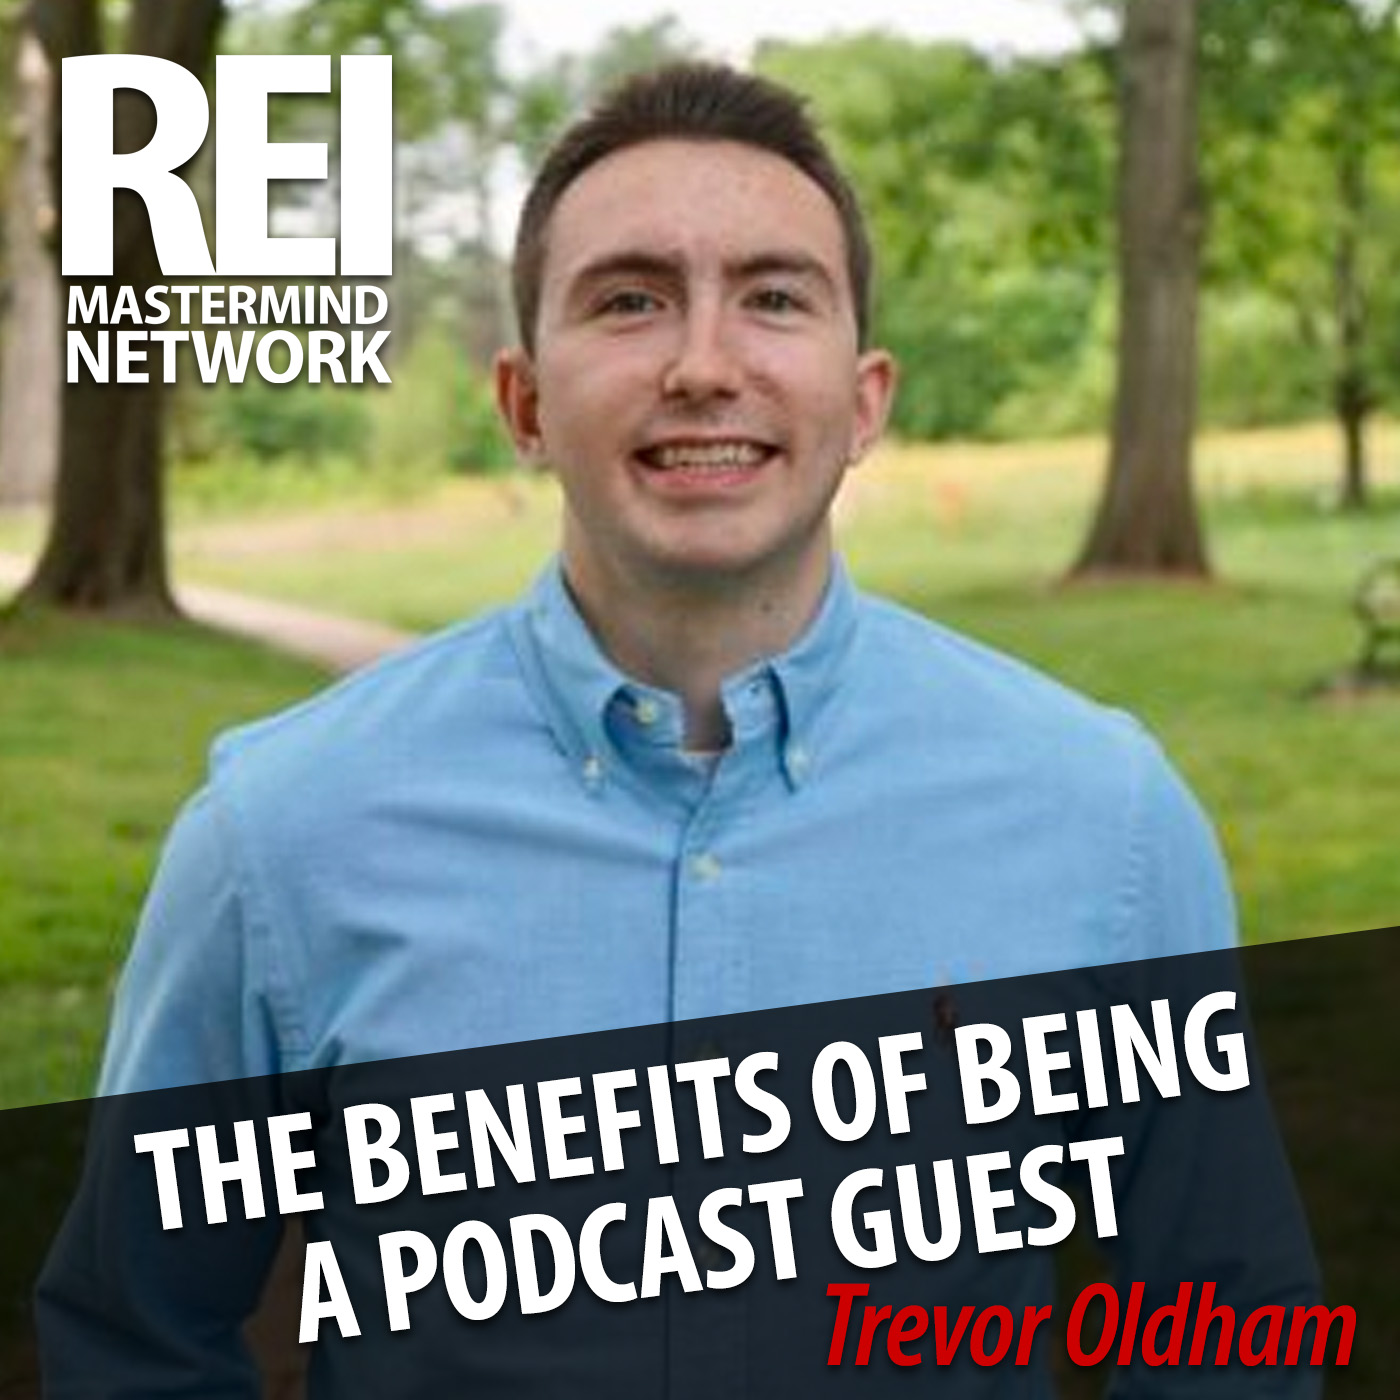 The Benefits of Being a Podcast Guest with Trevor Oldham